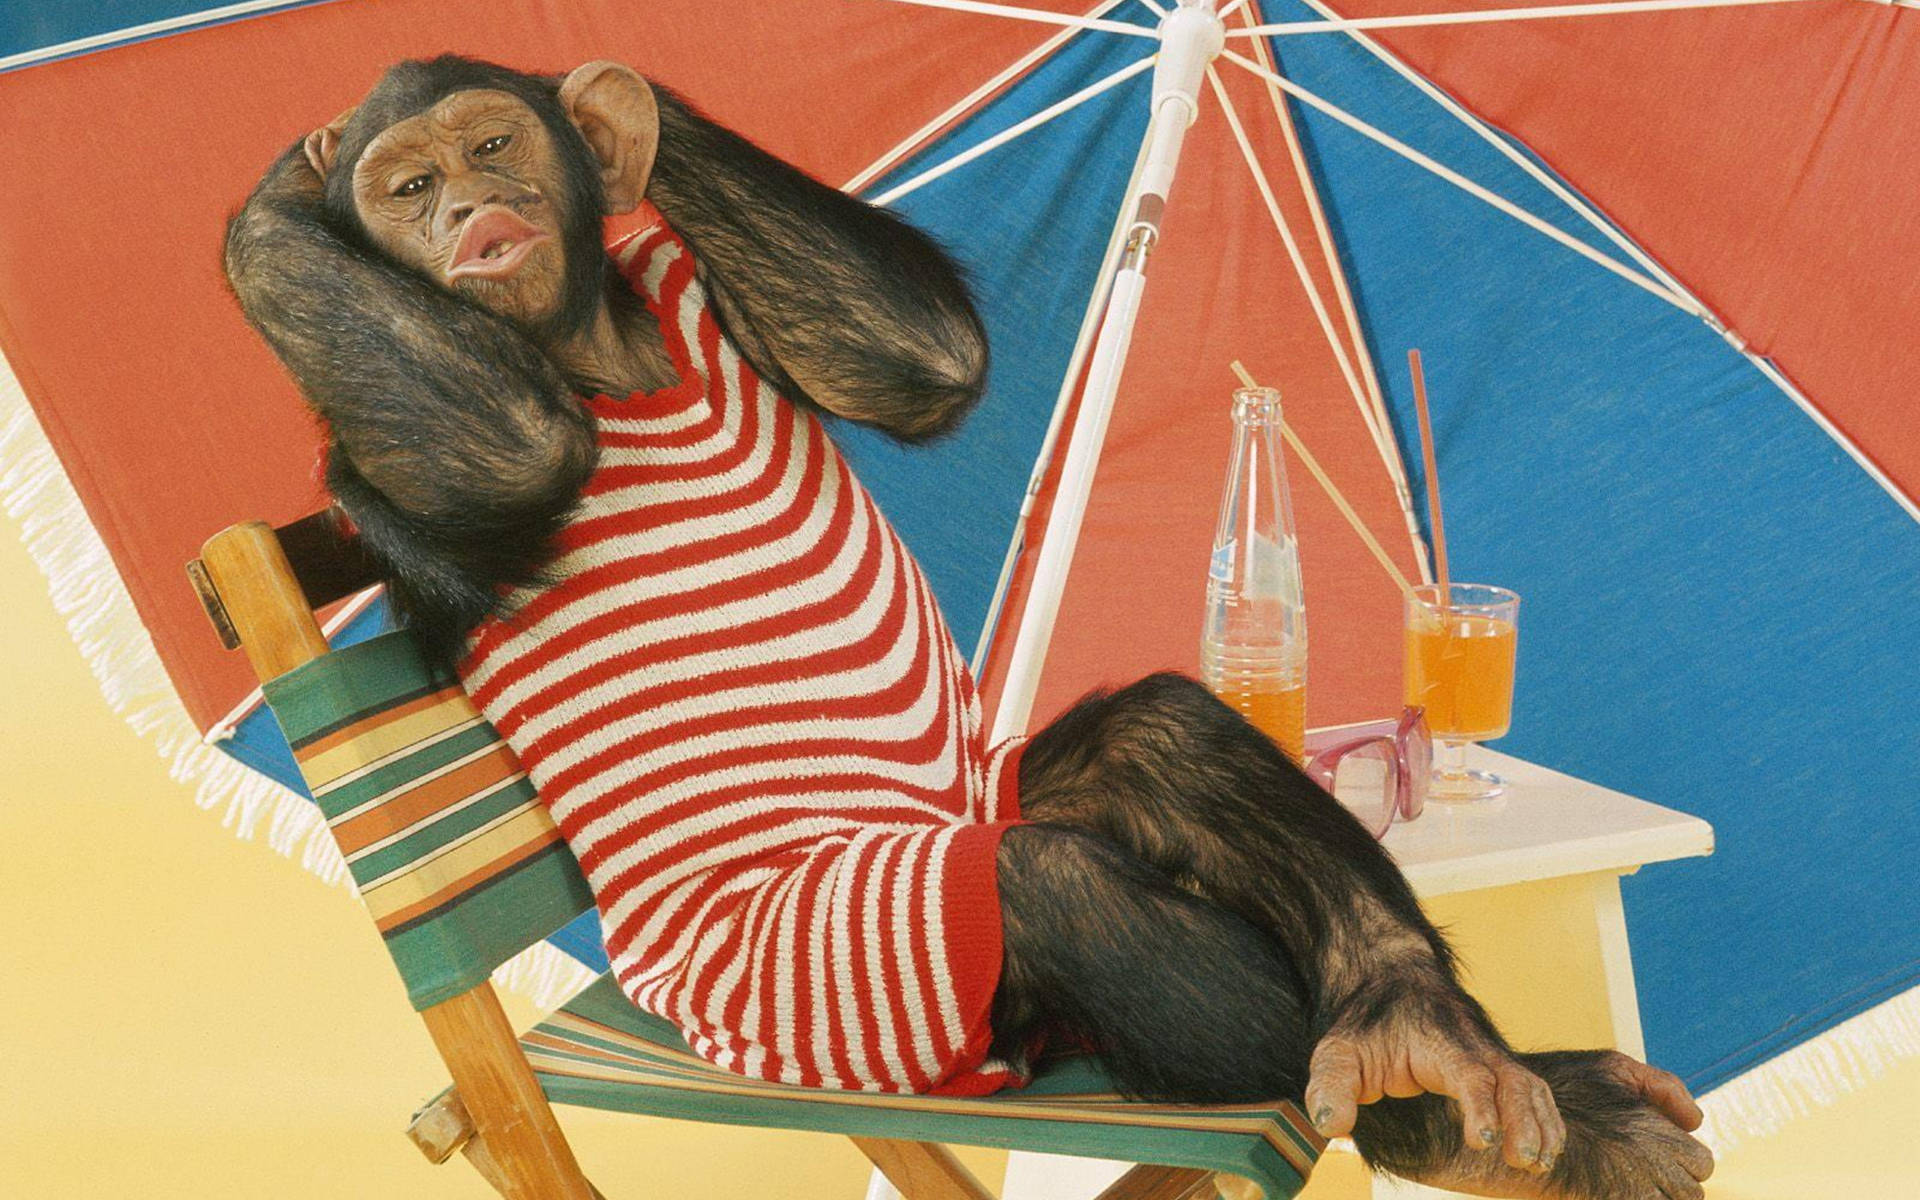 Relaxing Chimpanzee Beach Outfit Background